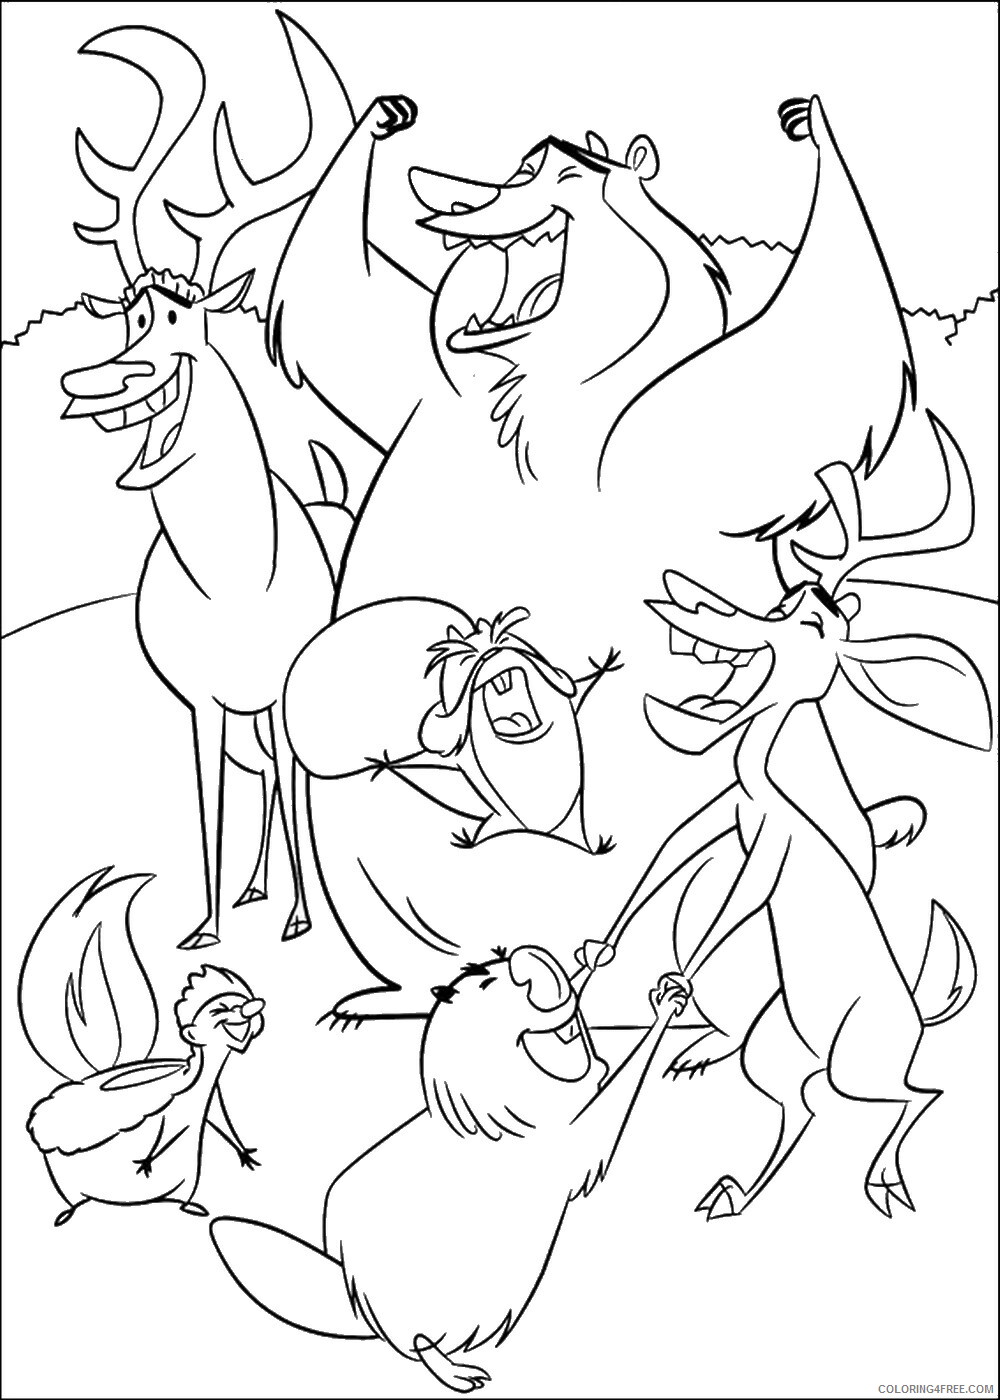 Open Season Coloring Pages TV Film open_season_cl_23 Printable 2020 05755 Coloring4free